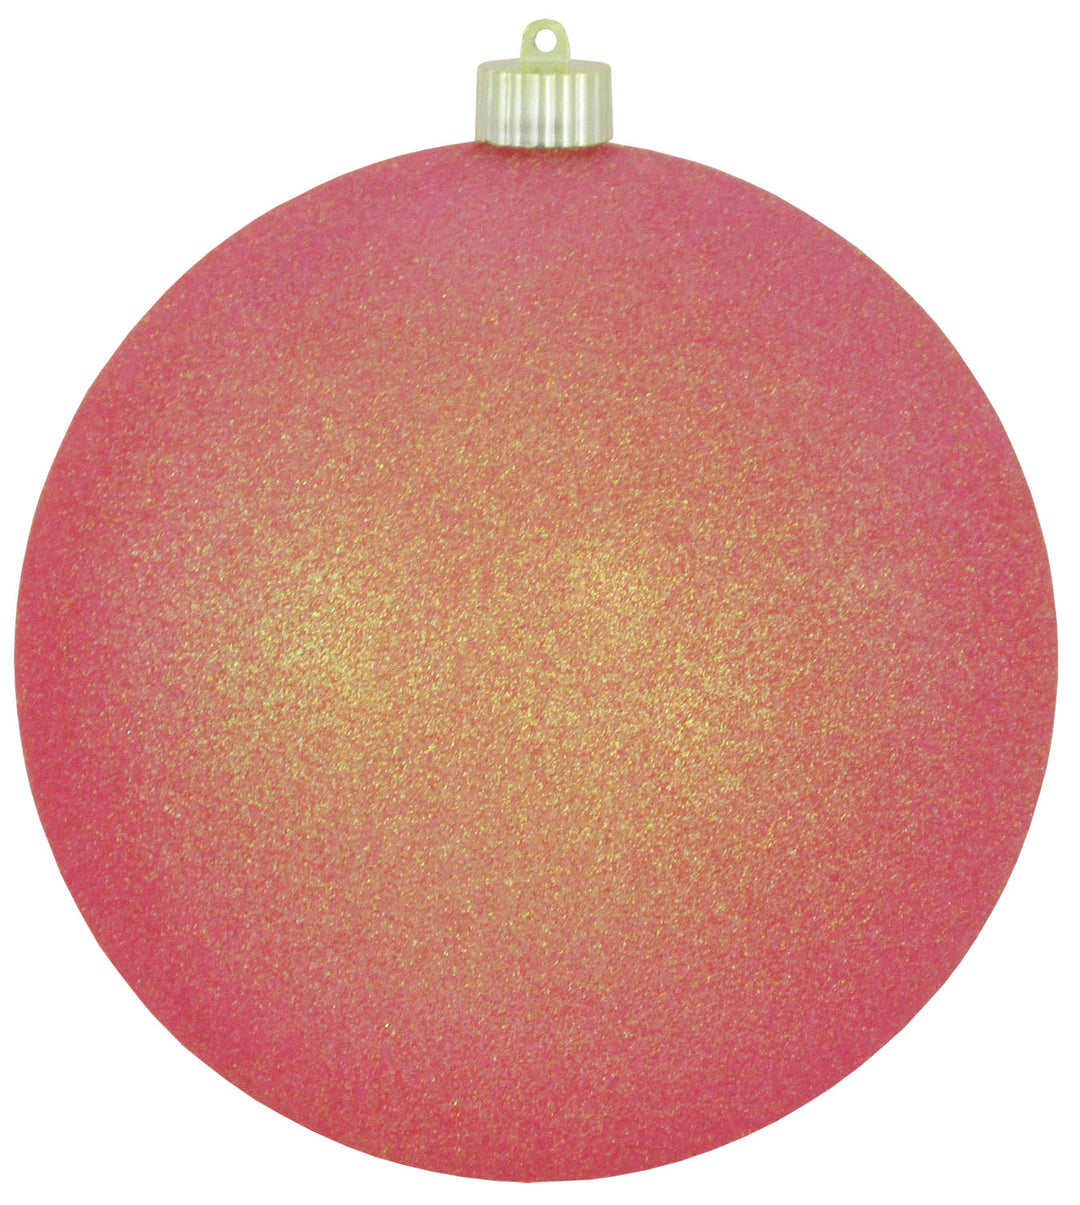 Christmas By Krebs 8" (200mm) Fire Red Glitter [1 Piece] Solid Commercial Grade Indoor and Outdoor Shatterproof Plastic, Water Resistant Ball Ornament Decorations